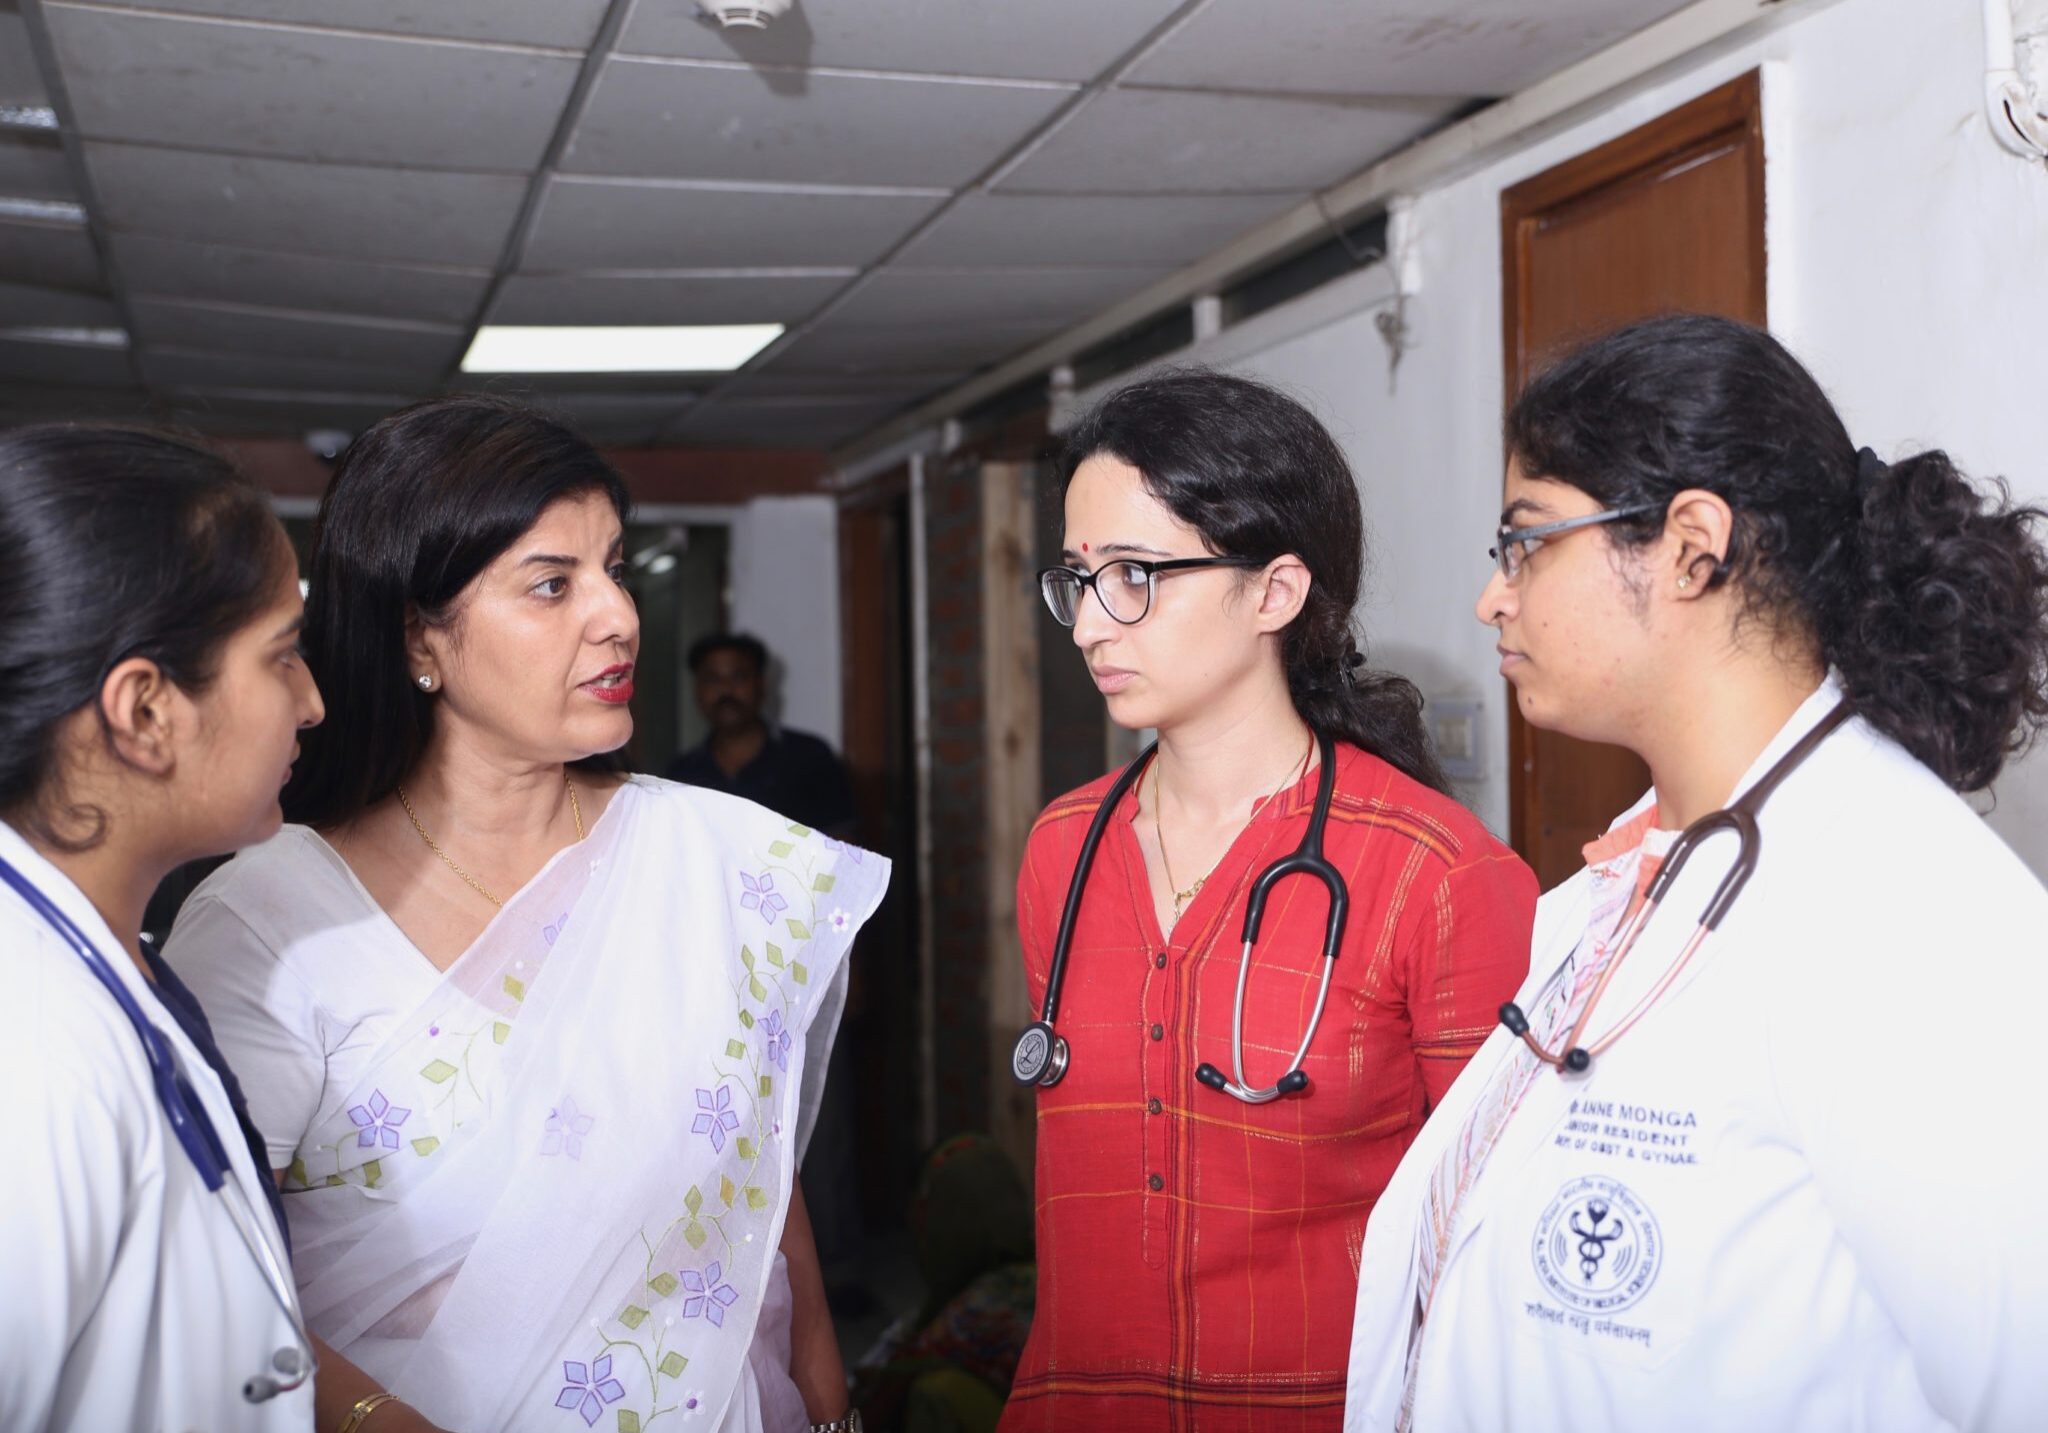 Dr. Neerja Bhatla consults with fellow physicians regarding cervical cancer